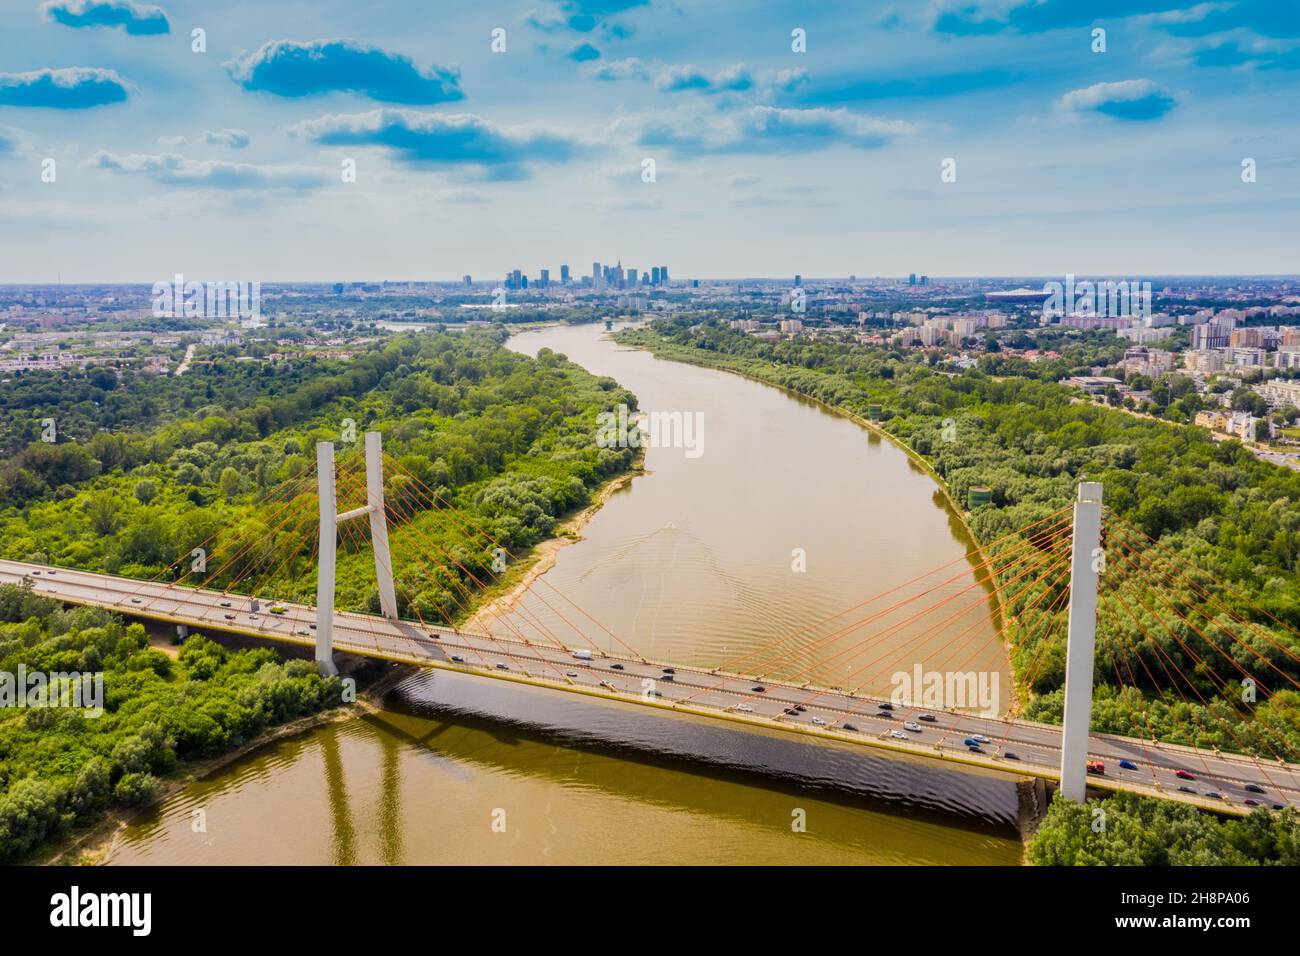 Drone view landscape highway bridge over river. Areal view city road landscape. Warsaw. Europe Stock Photo